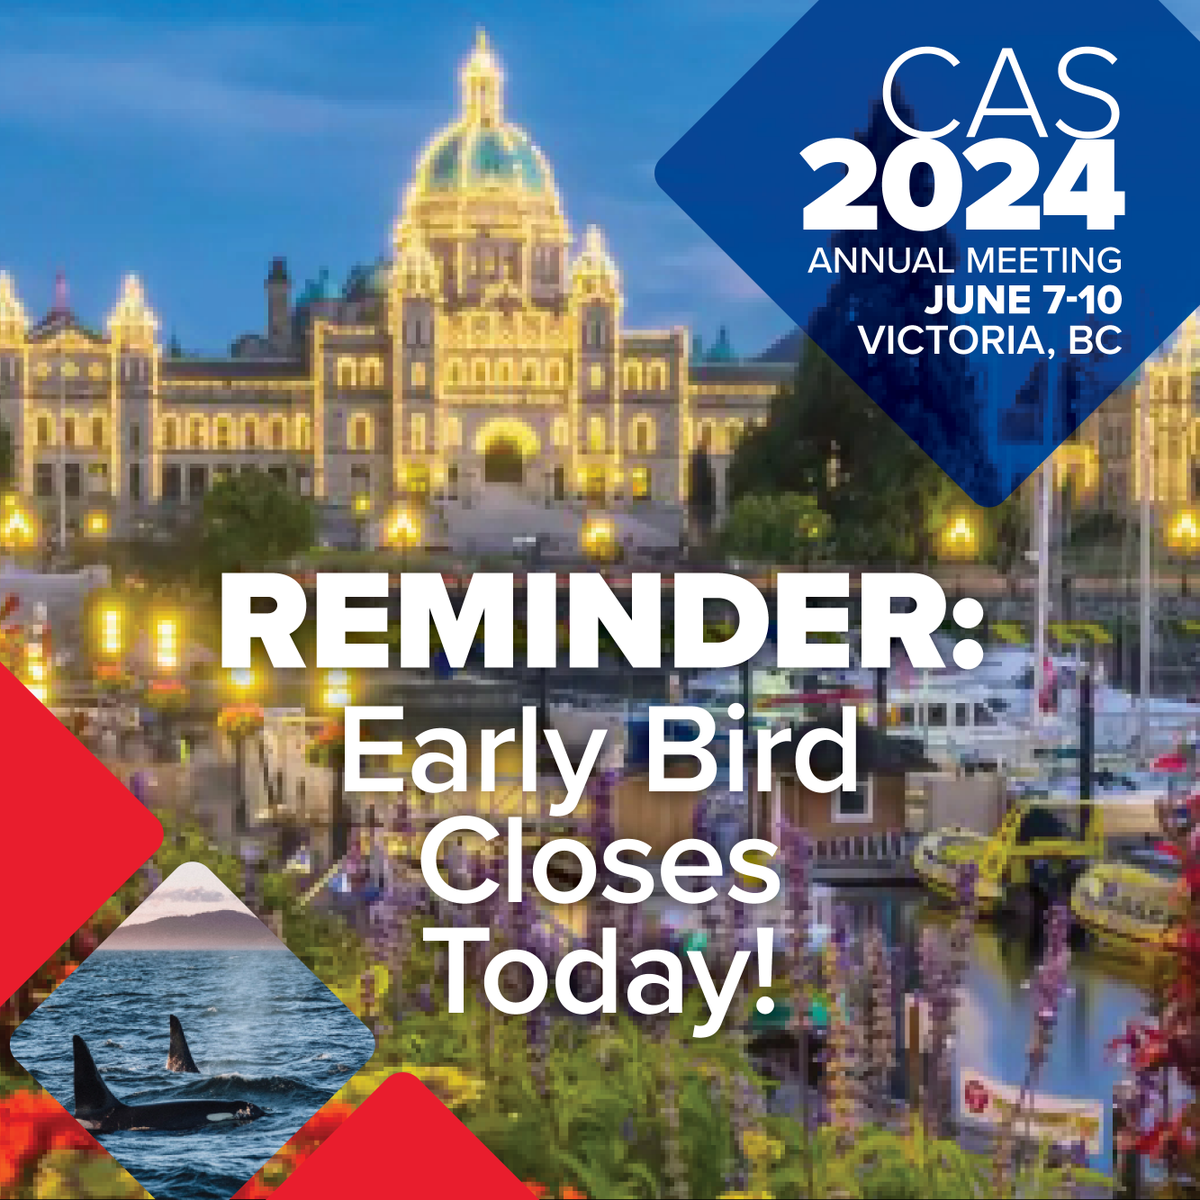 Reminder! #CASAM2024 Early Bird rate ends today! Held June 7-10 in Victoria, BC, #CASAM2024 features interactive workshops, sessions, PBLDs, competitions, SIM Olympics, social events and more! Don't delay! Register now and save - cas.ca/annual-meeting #anesthesiaevents